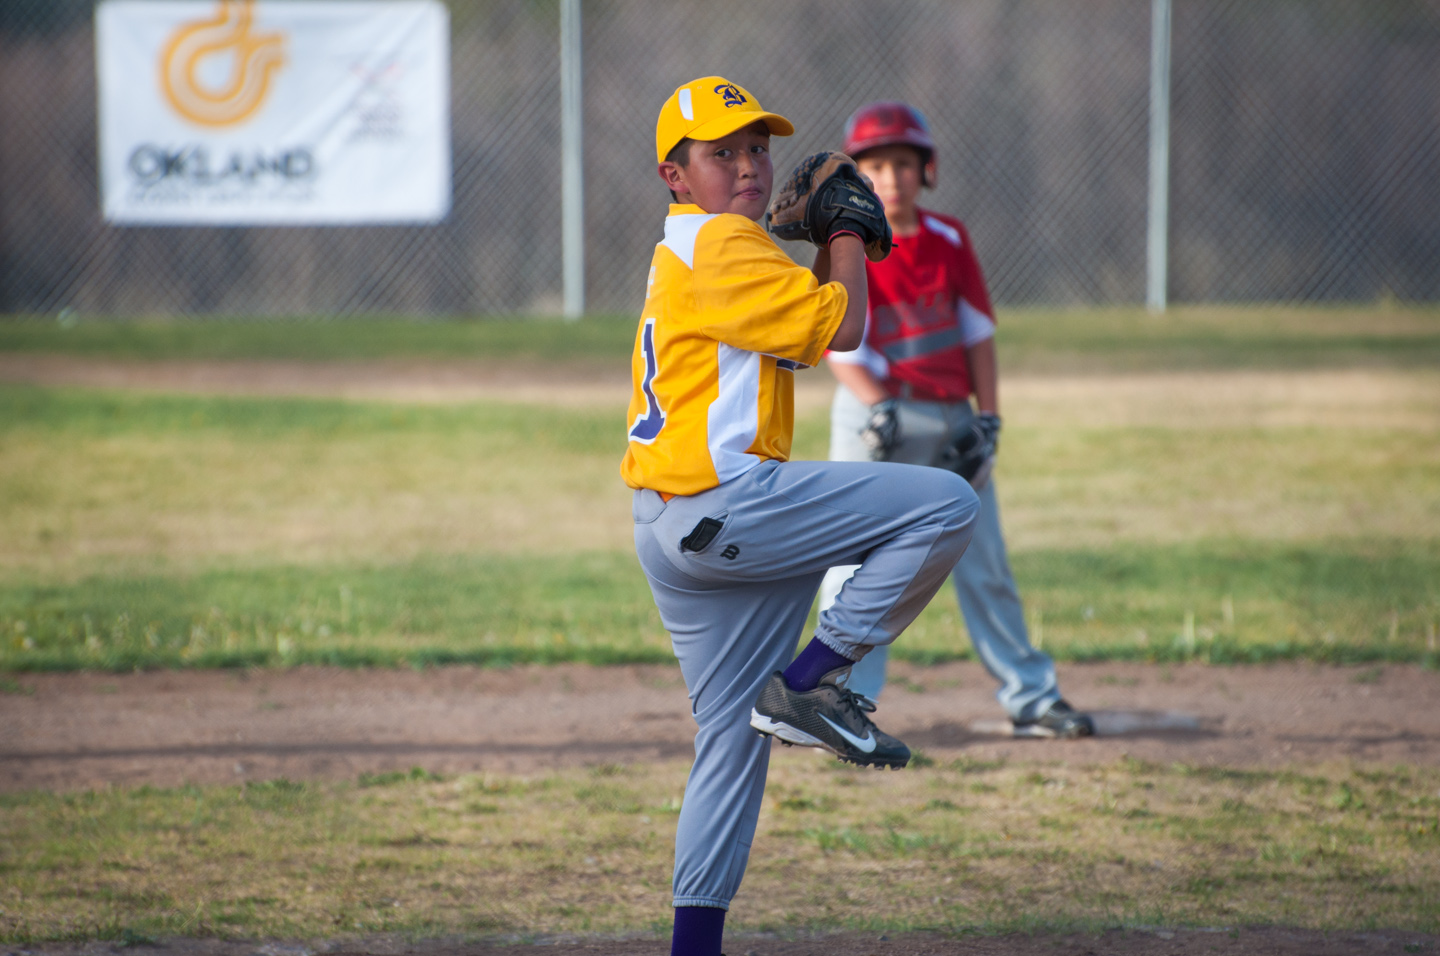 Bayfield pitcher Gabriel Tucson winds up during a youth baseball game